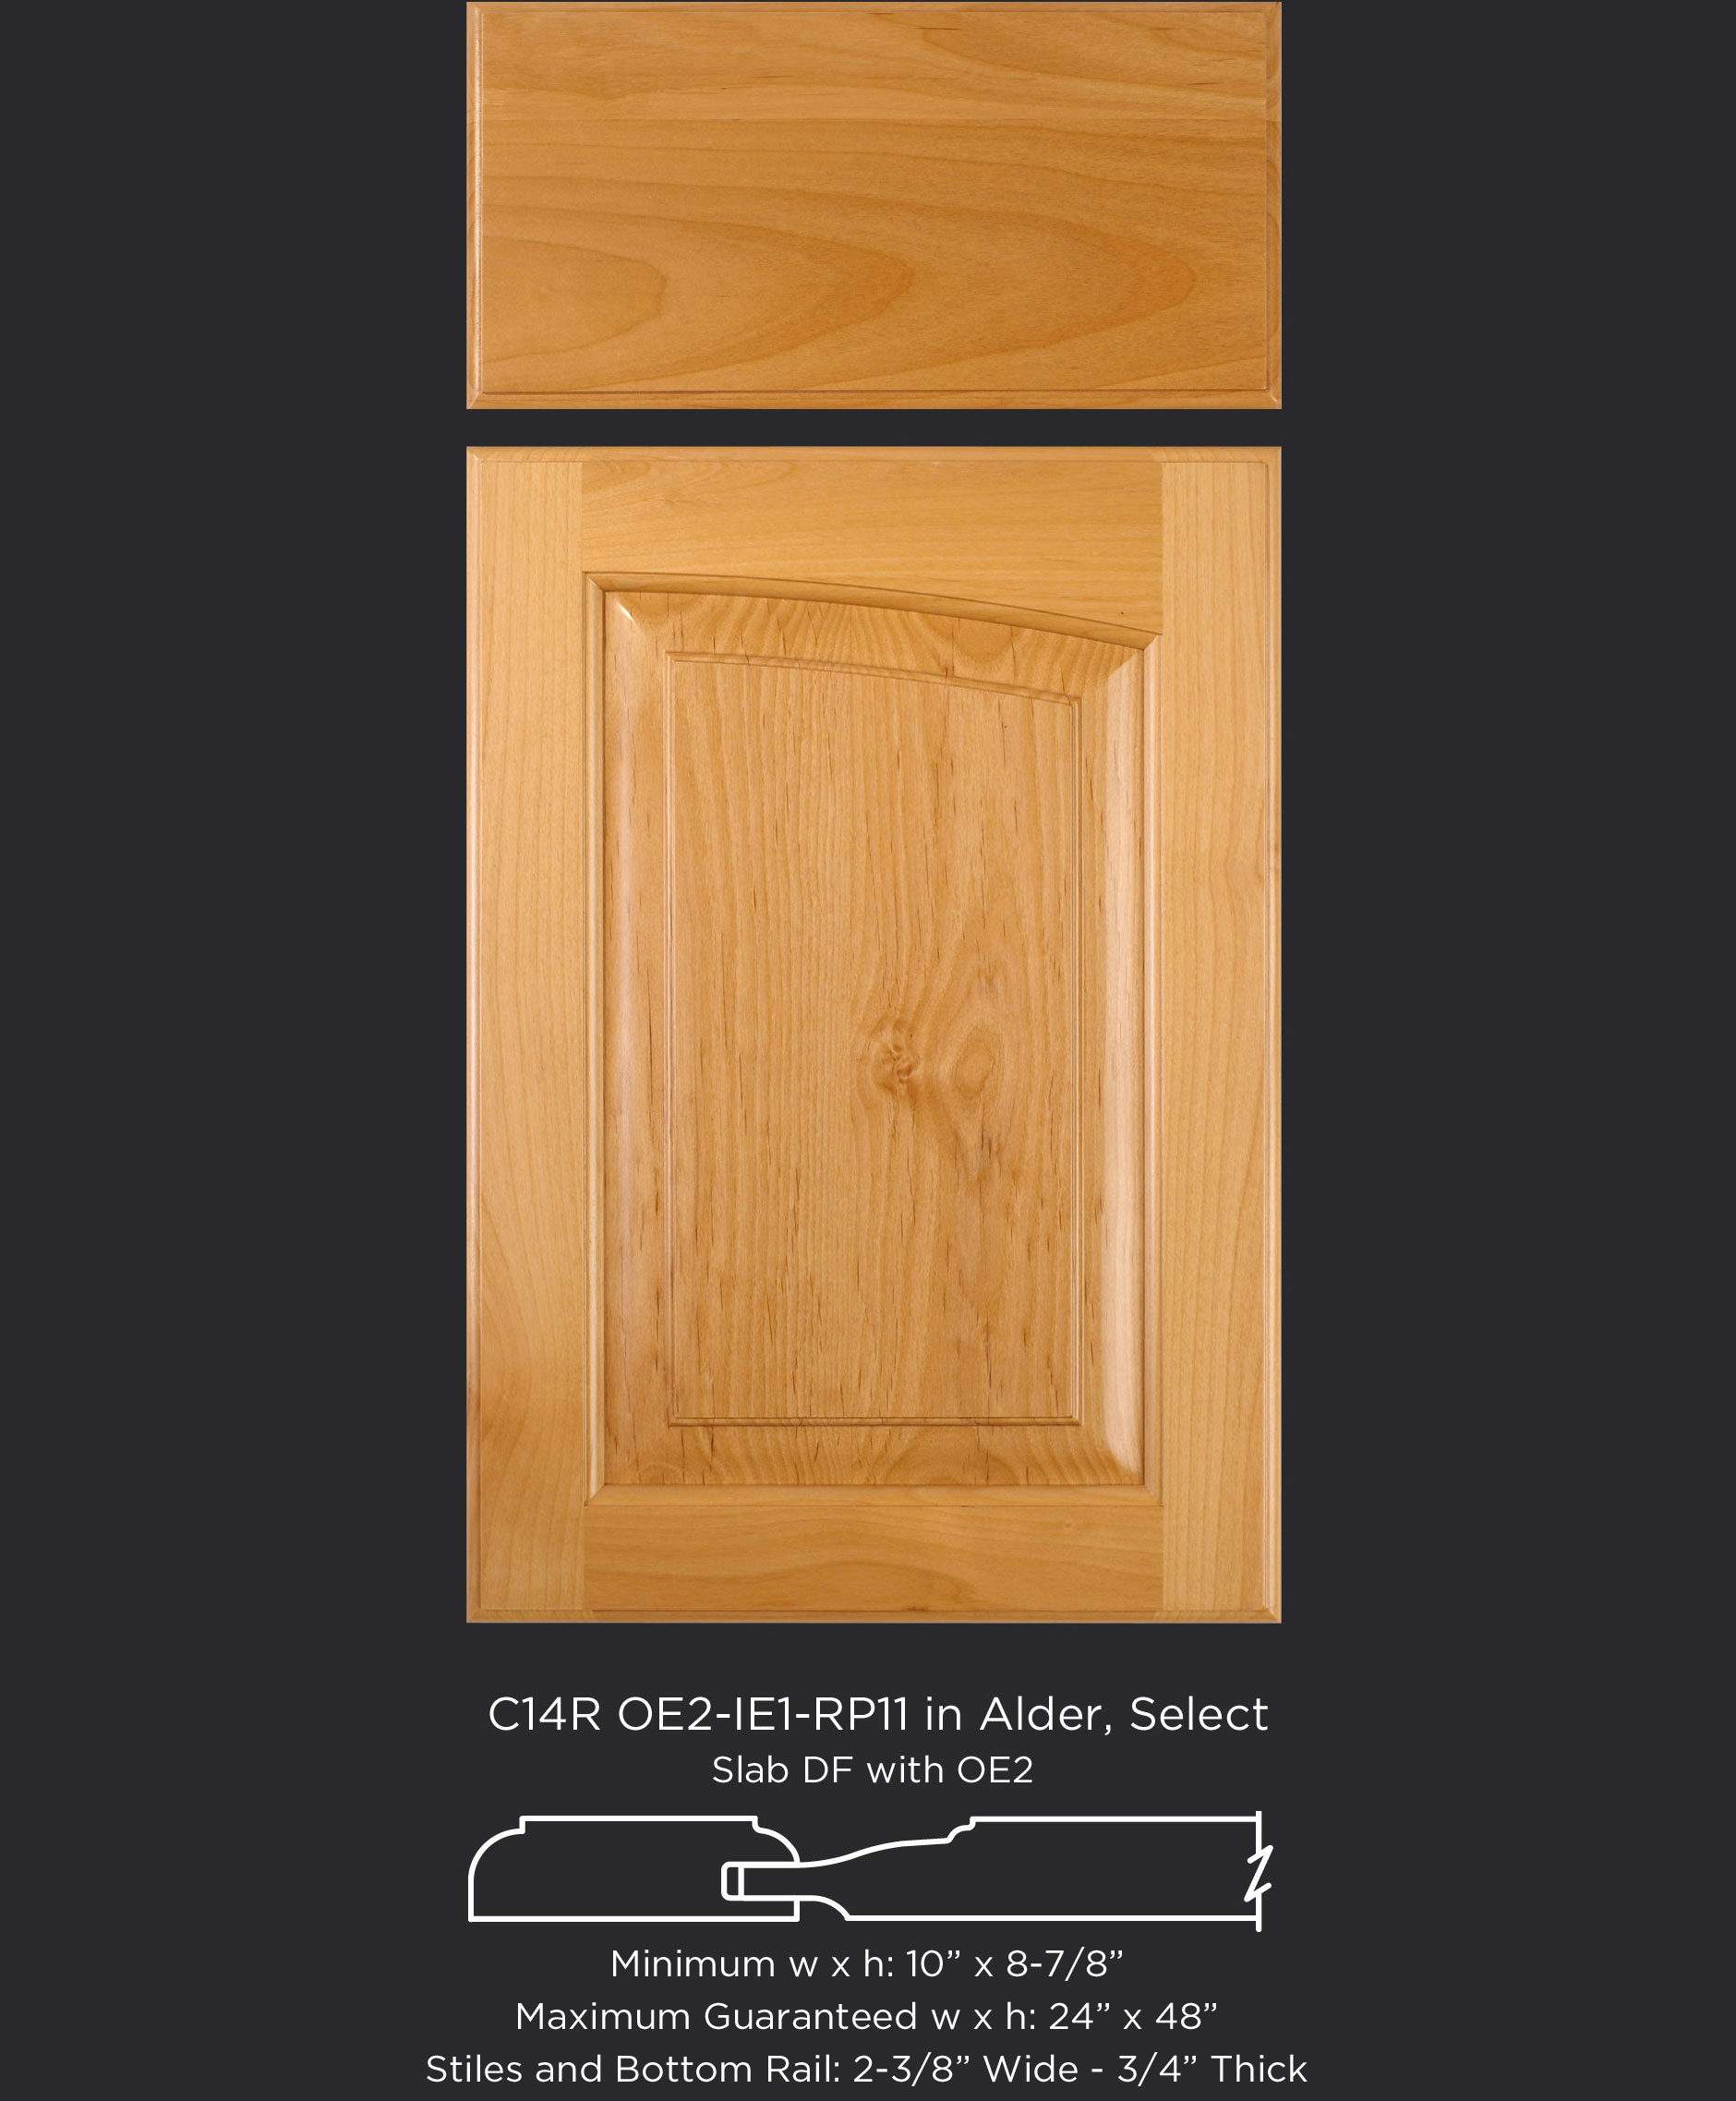 Cope and Stick Cabinet Door C14R OE2-IE1-RP11 in Alder, Select and Slab Drawer Front